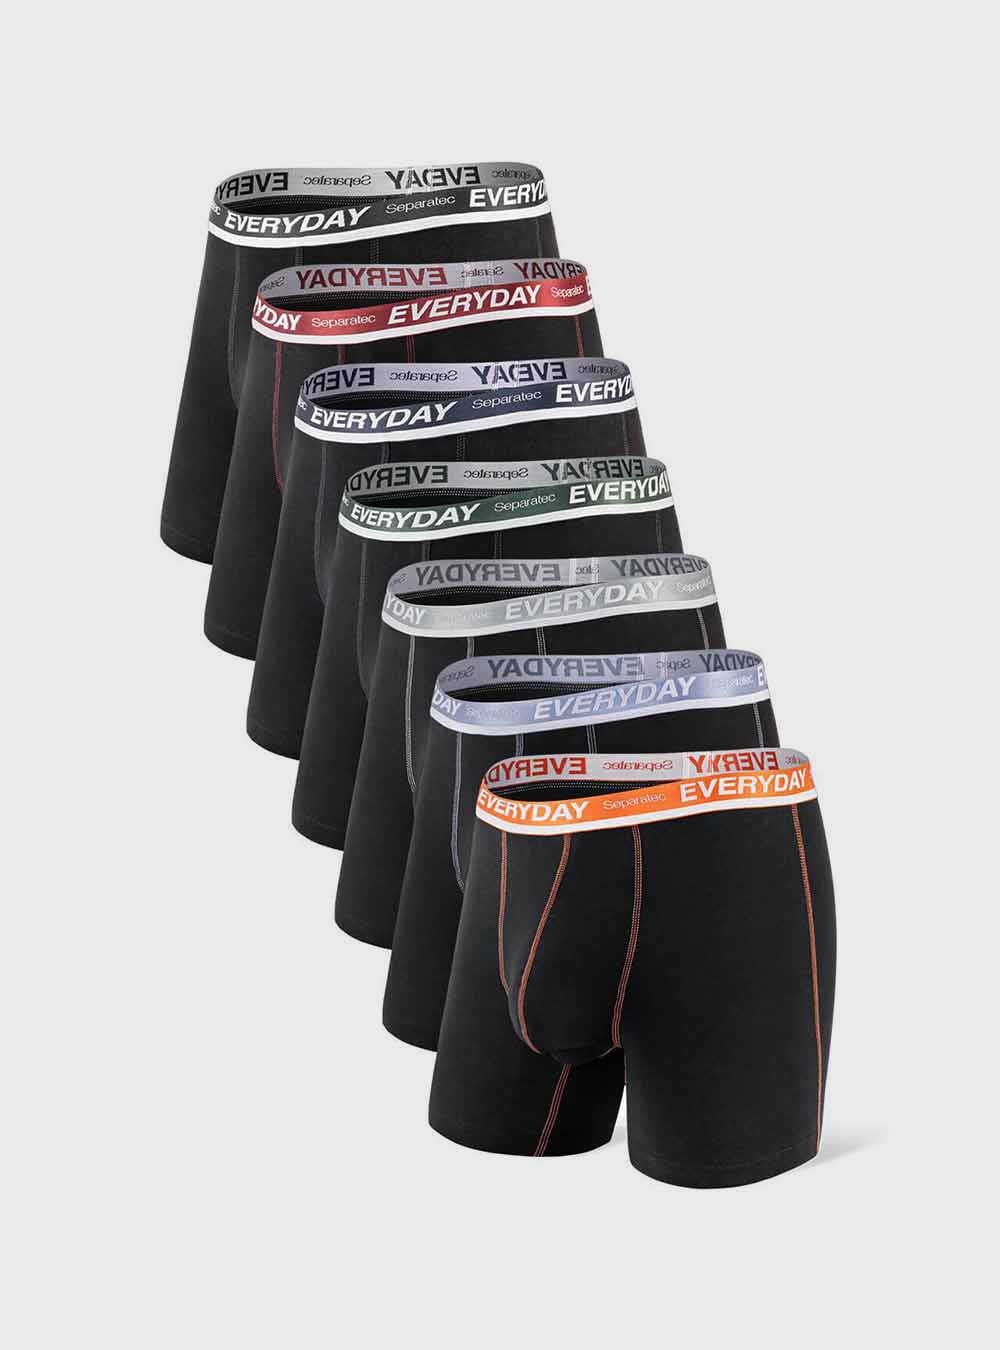 Black Cotton Colorful Waistband Everyday Boxer Briefs 7 Pack